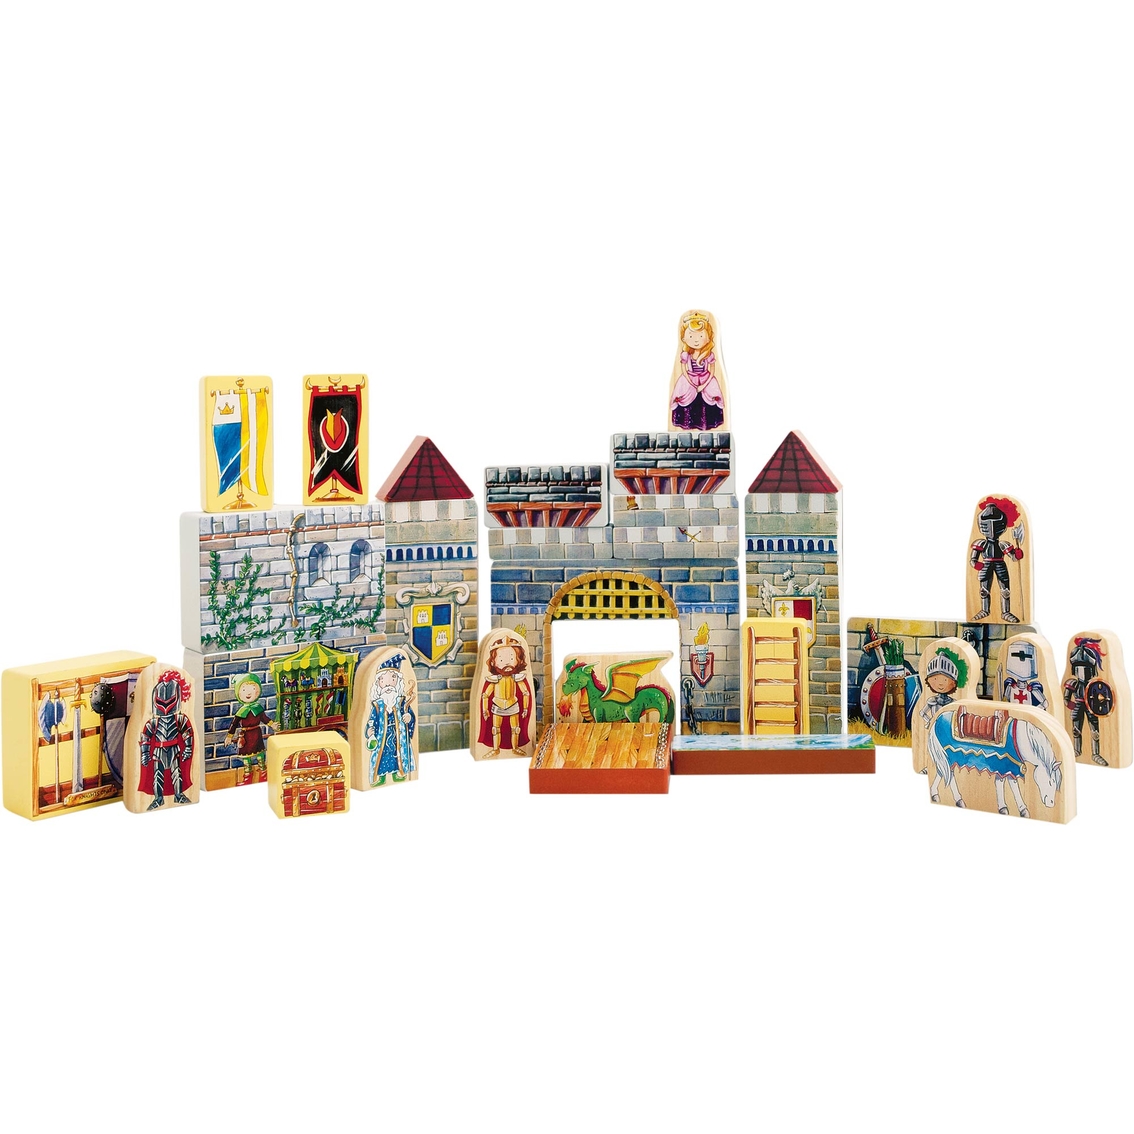 T.S. Shure ArchiQuest Wooden Castle Blocks Playset and Storybook - Image 3 of 3